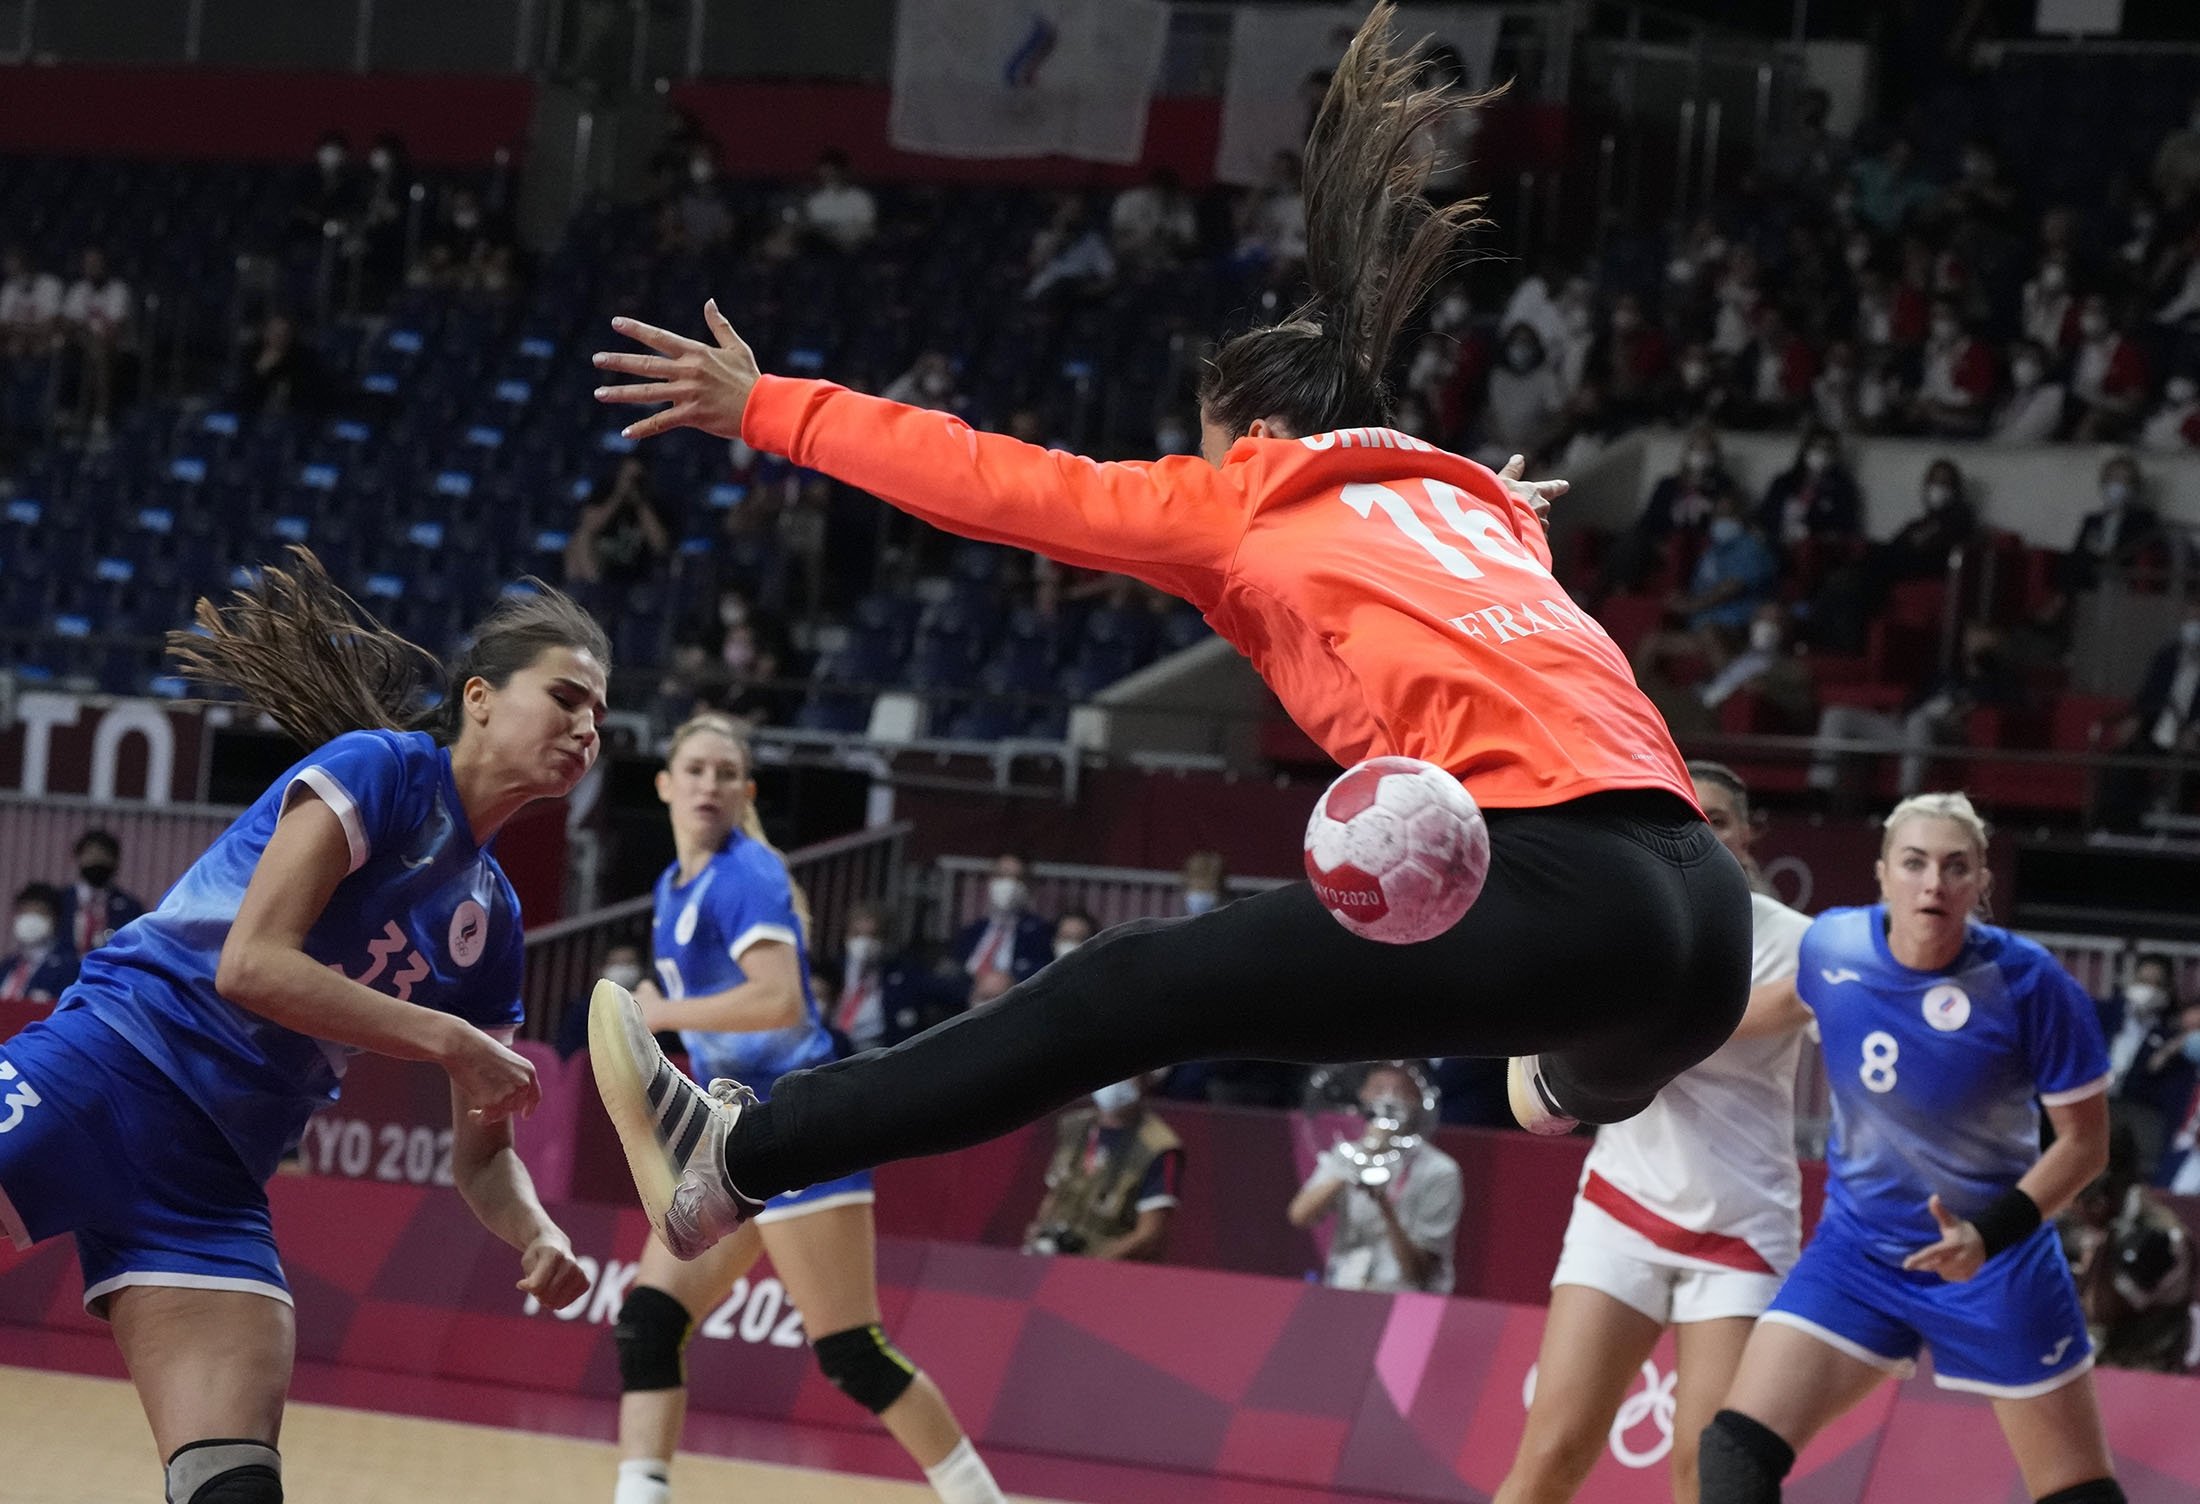 Volleyball Tokyo 2020 Olympics Top Moments